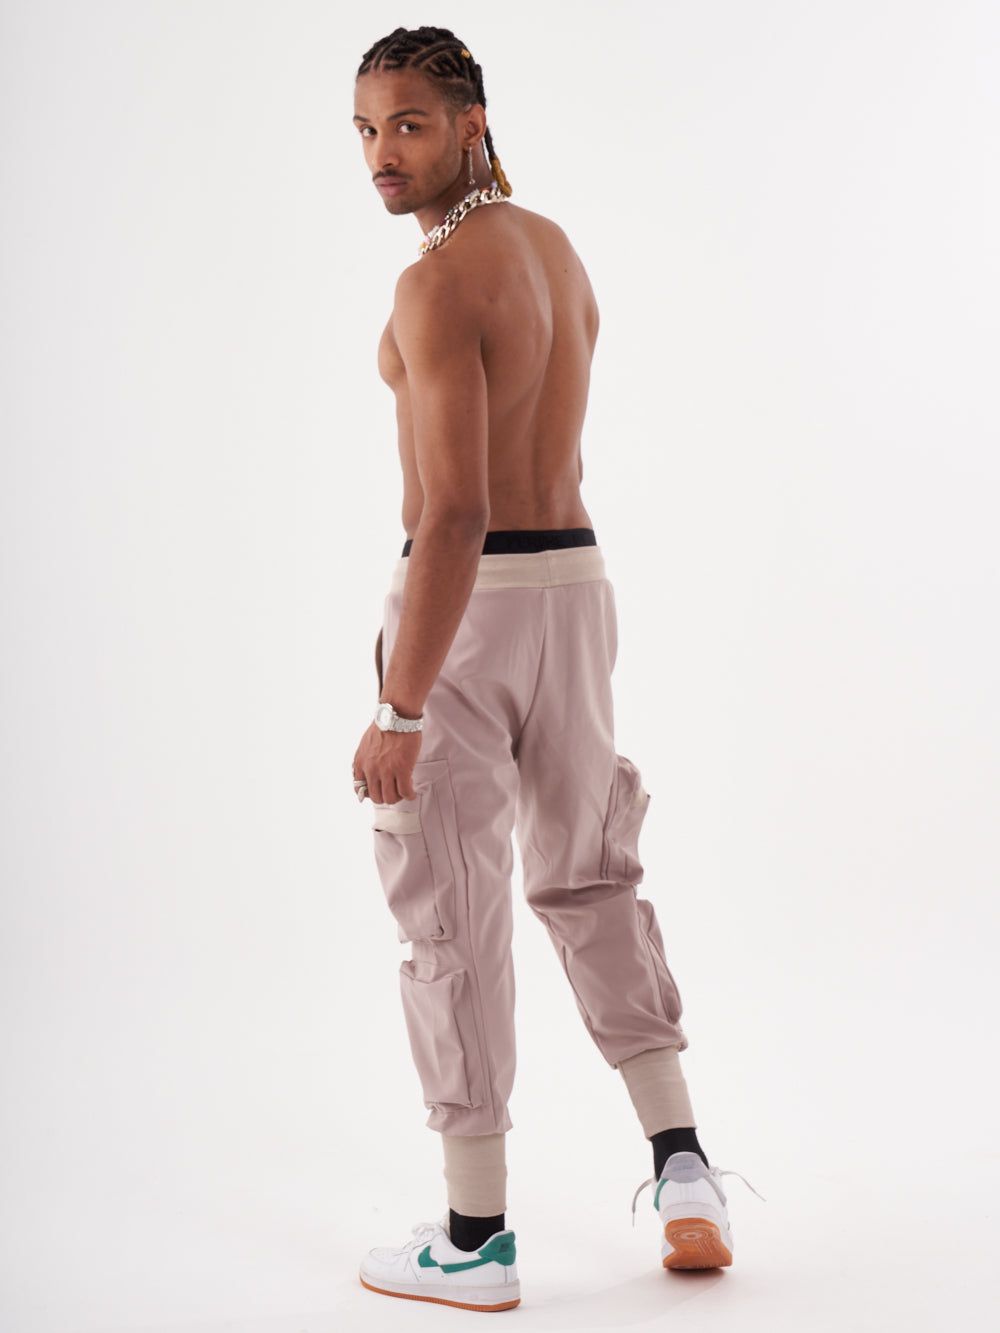 A man in OUTLIER | MAUVE jogging pant is standing in front of a white background.